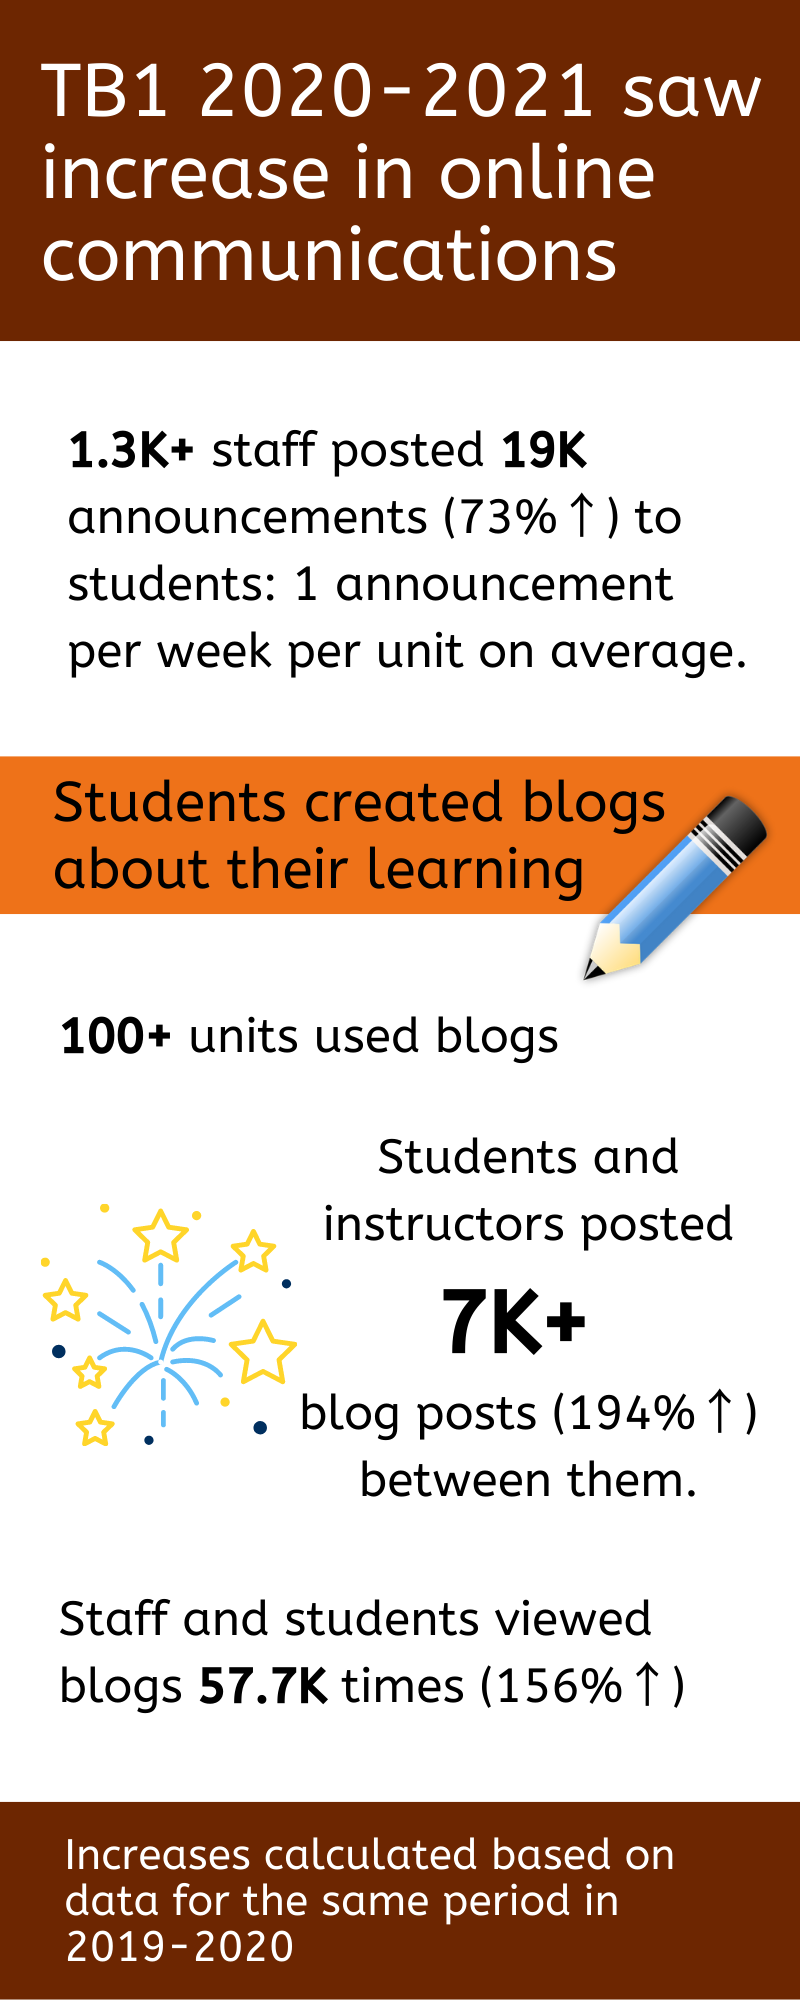 TB1 2020-2021 saw increase in online communications. 1.3K+ staff posted 19K announcements (up 73%) to students: 1/week/unit on average. Students created blogs about their learning. 100+ units used blogs. Students and instructors posted 7K+ blog posts (up 194%) between them. Staff & students viewed blogs 57.7K times (up 156%). Increases calculated based on data for the same period in 2019-2020.